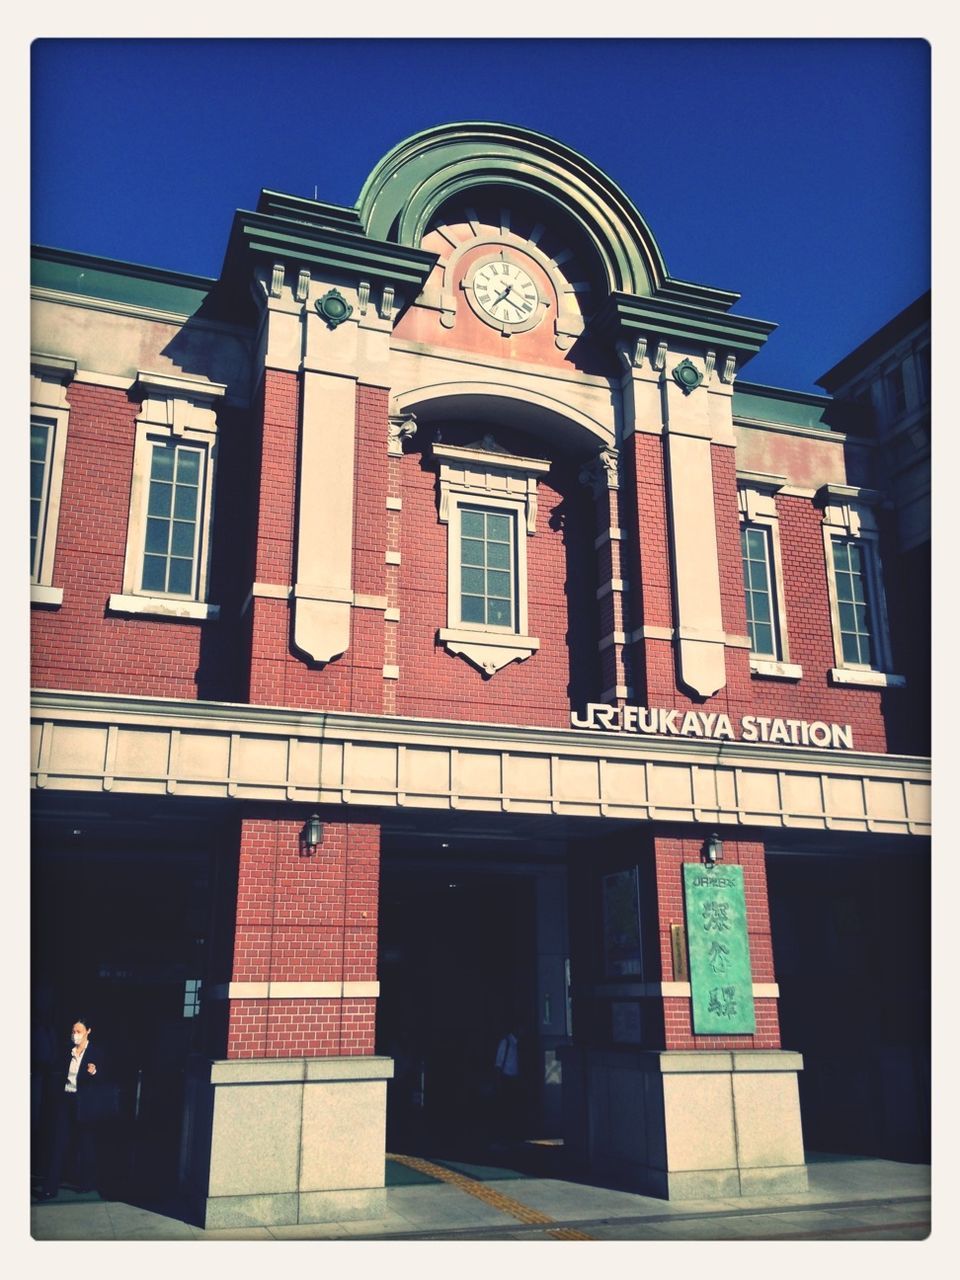 Railroad station in sunny day